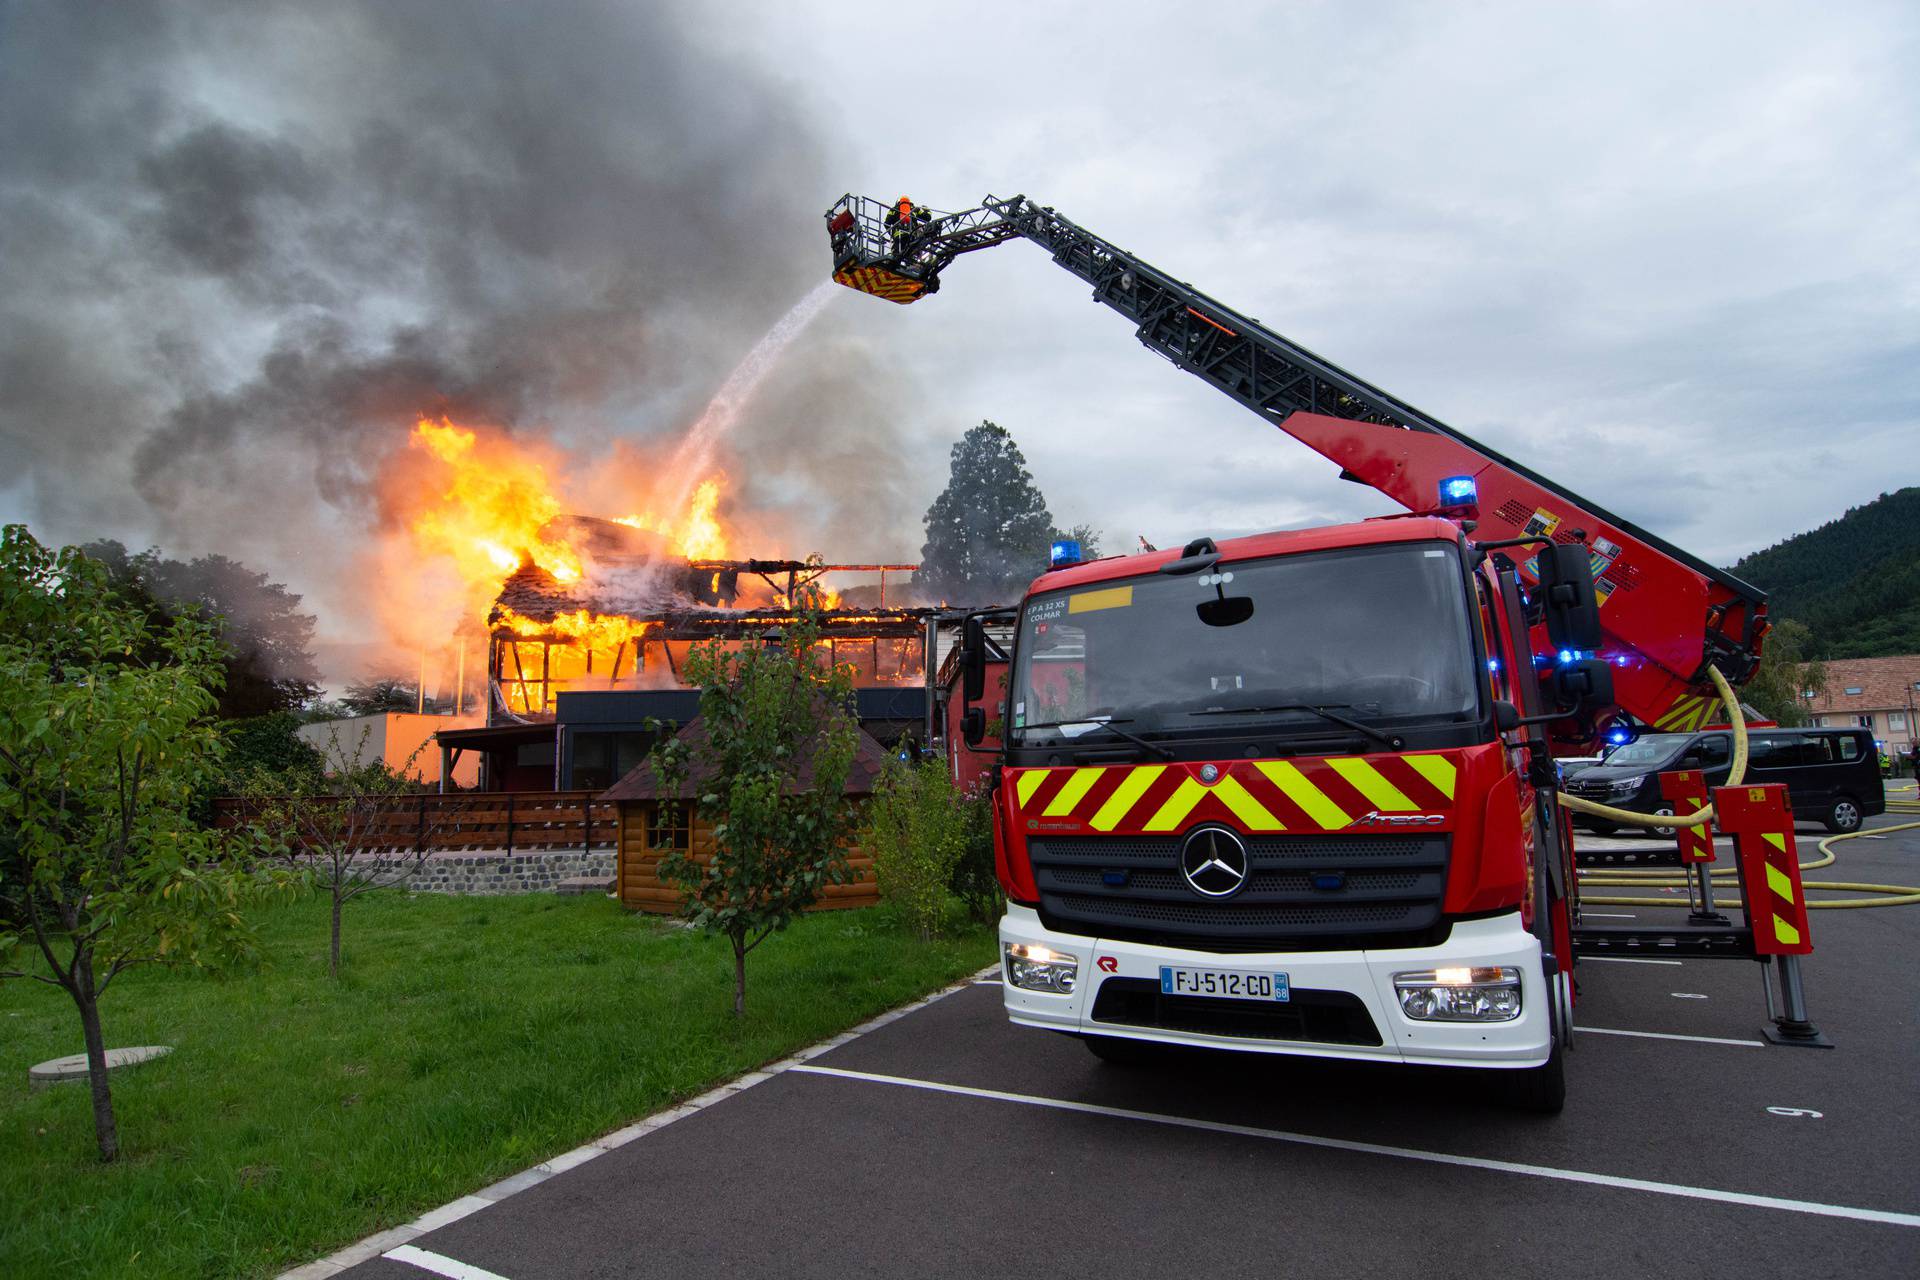 Eleven missing after fire in vacation home in eastern France